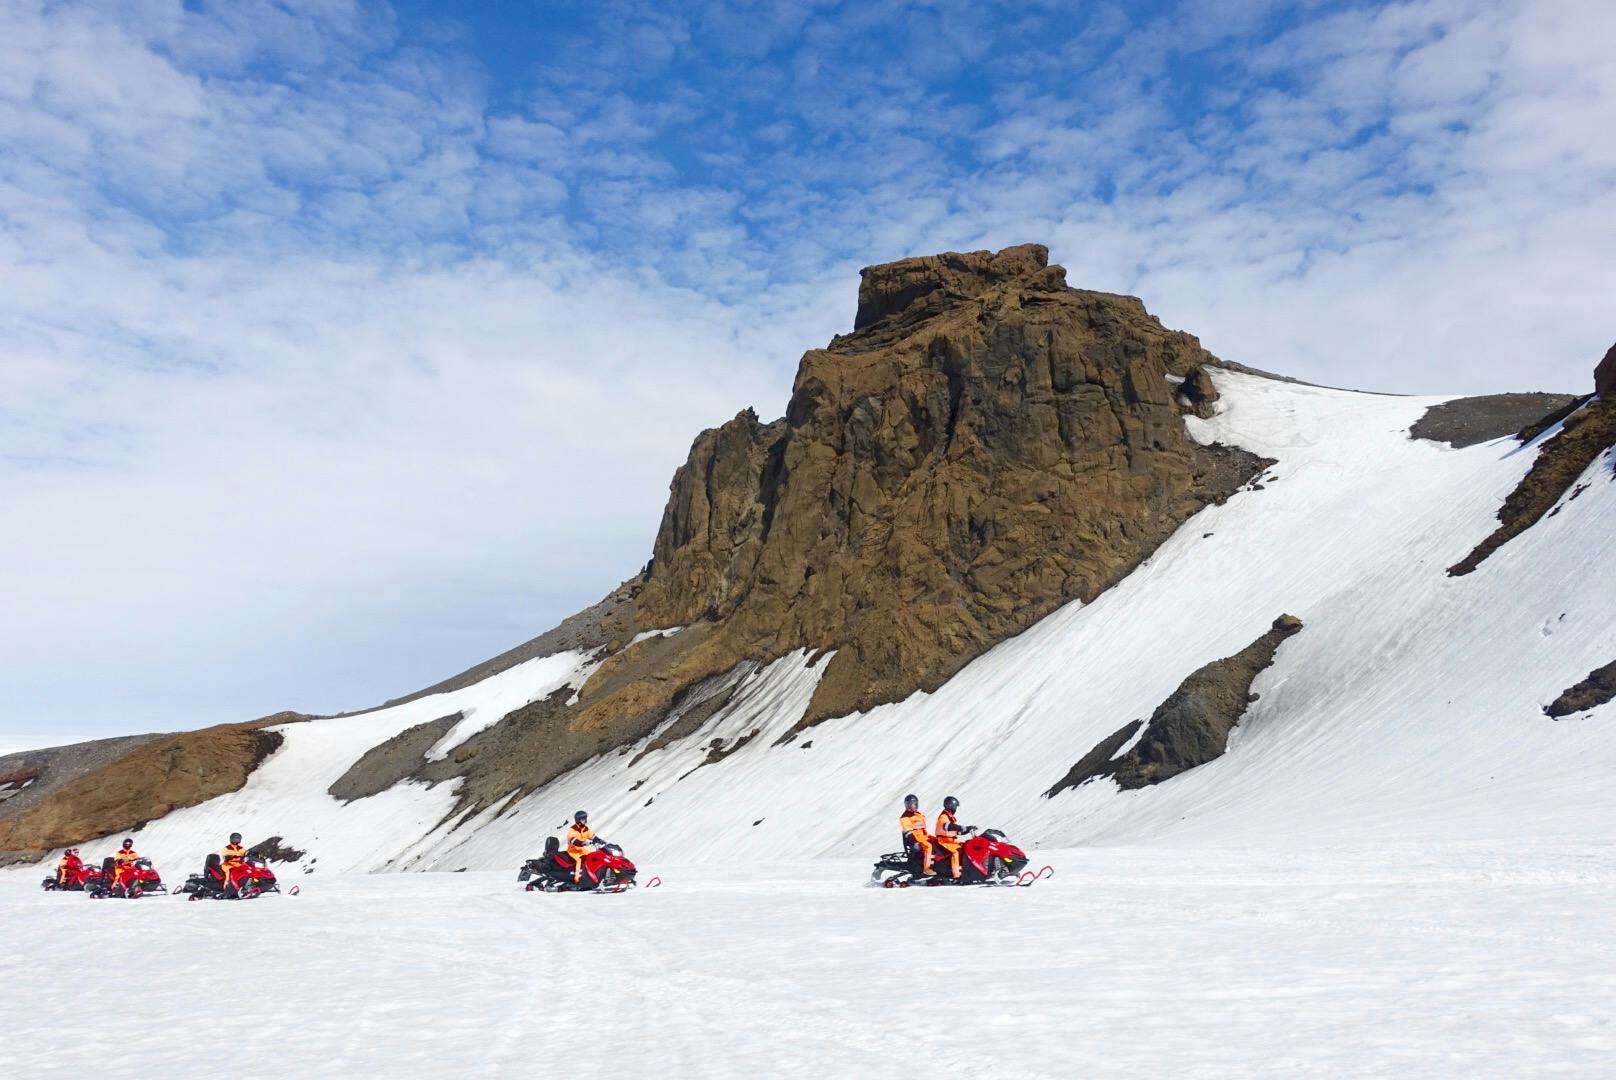 This 4 Day Winter Adventure takes you snowmobiling across Langjökull, Iceland's second largest glacier.